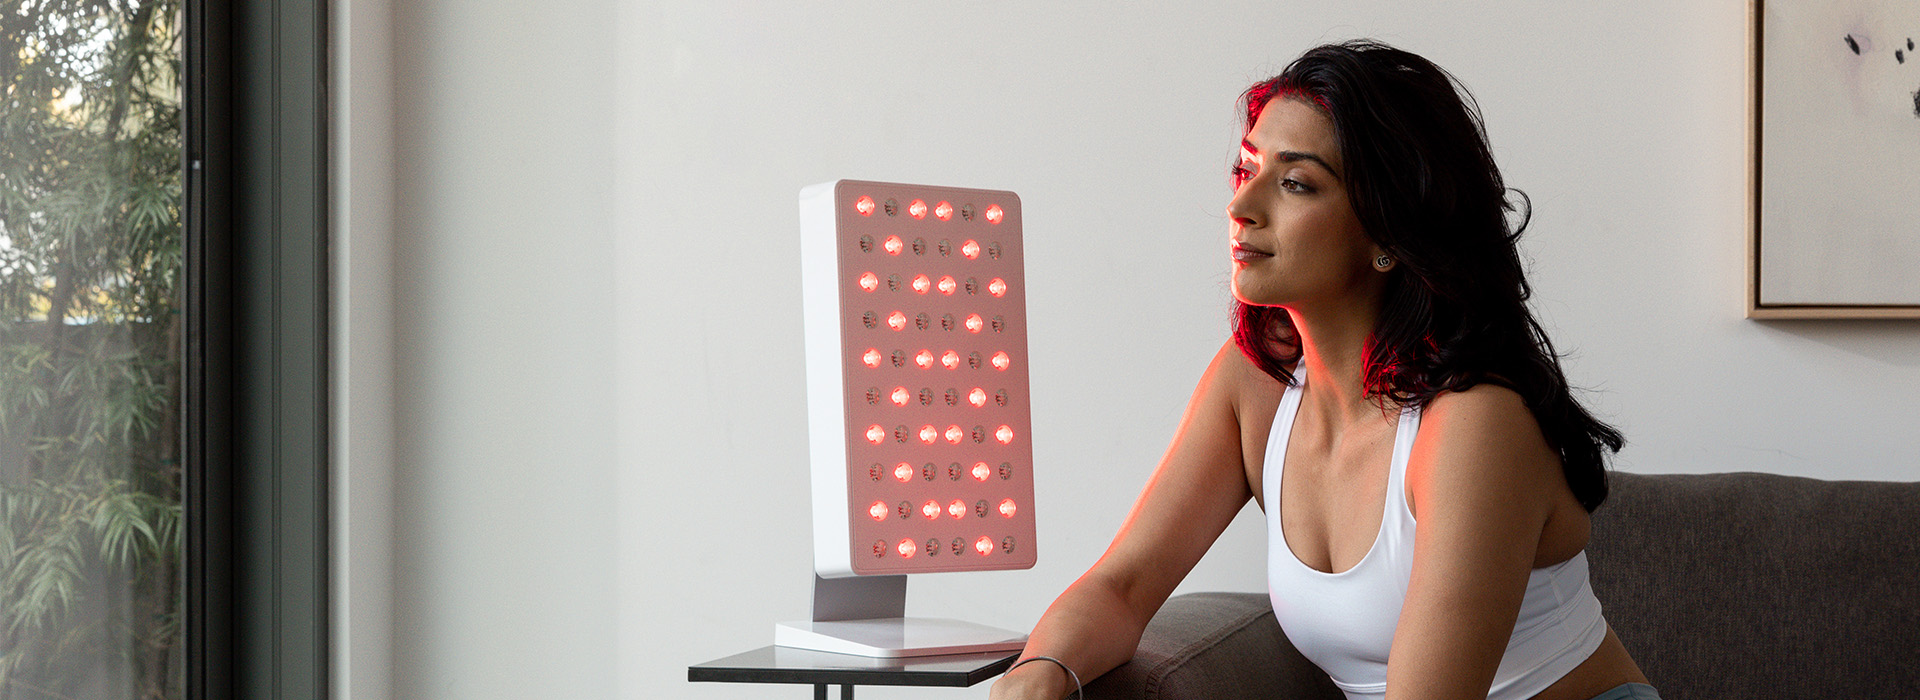 Home - Red Light Therapy Bed - Body Balance System